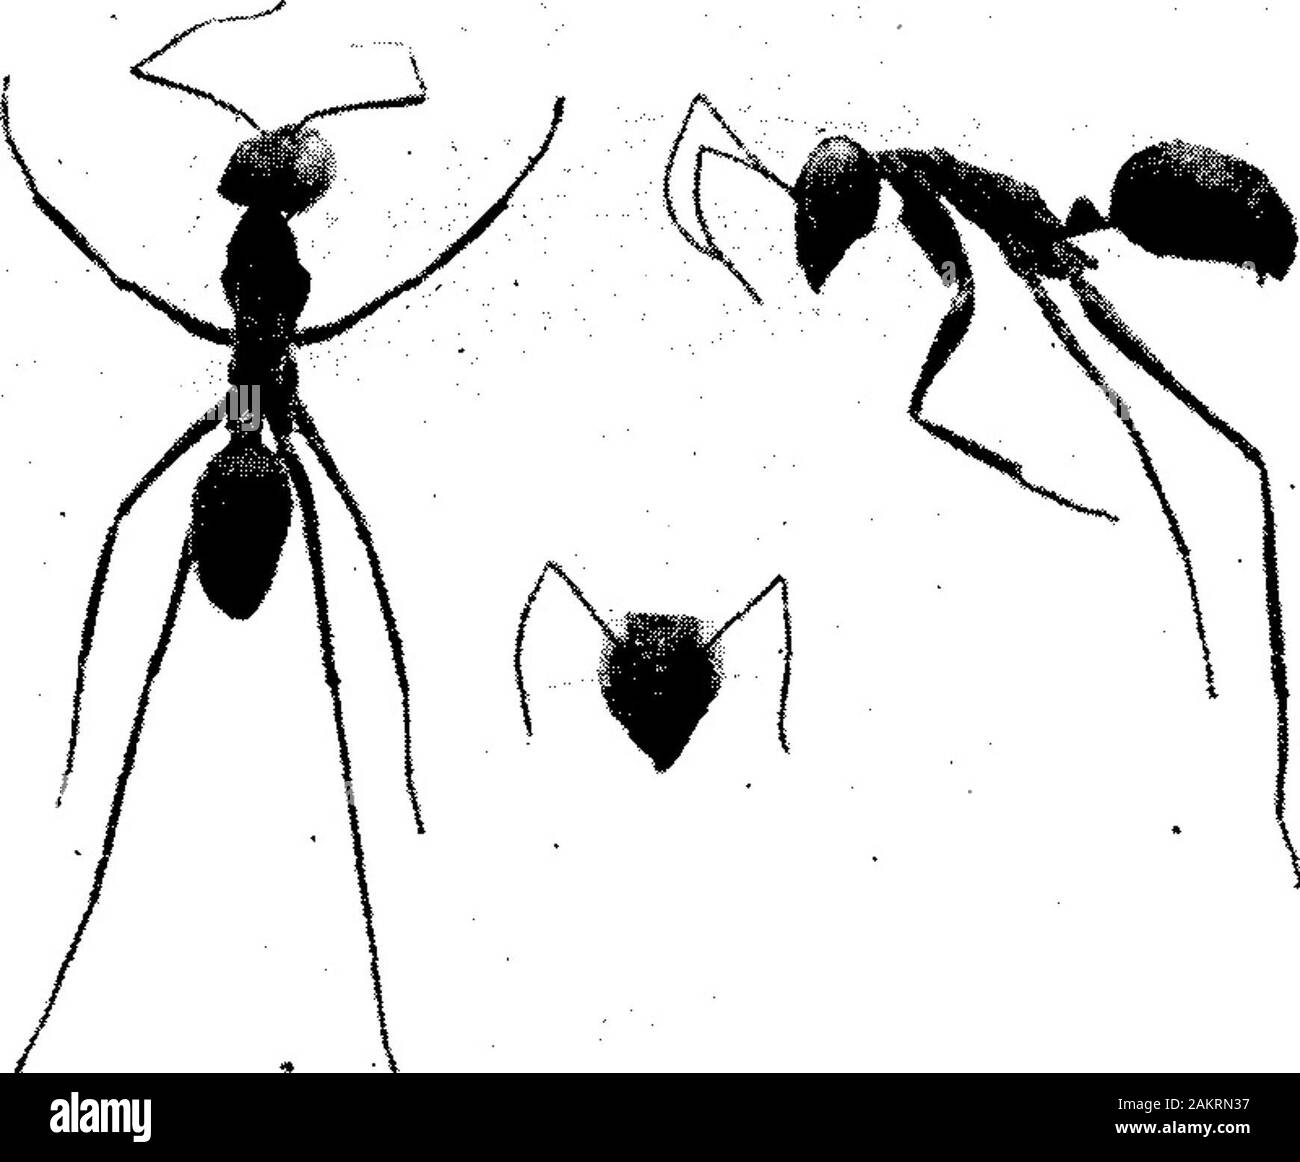 Observations on Gigantiops destructor Fabricius and other leaping ants. . eudomyrma gracilis Fabr., whichresembles a black Attid spider in form and color, and have mistaken itserratic movements for leaps. The well-known arachnologist, E. Simon (inEmery, Voyage de M. E. Simon (Dec., i887-Avril, 1888). Formicides,Ann. Soc. Ent. France 1890, p. 65 nota) noticed that all the species of thegenus Pseudomyrma reproduce exactly the forms and colors of the spiders ofthe genus Simonella Peckh. (Attidae) and the resemblance is equally strikingin their gait. For the present it seems advisable, therefore, Stock Photo